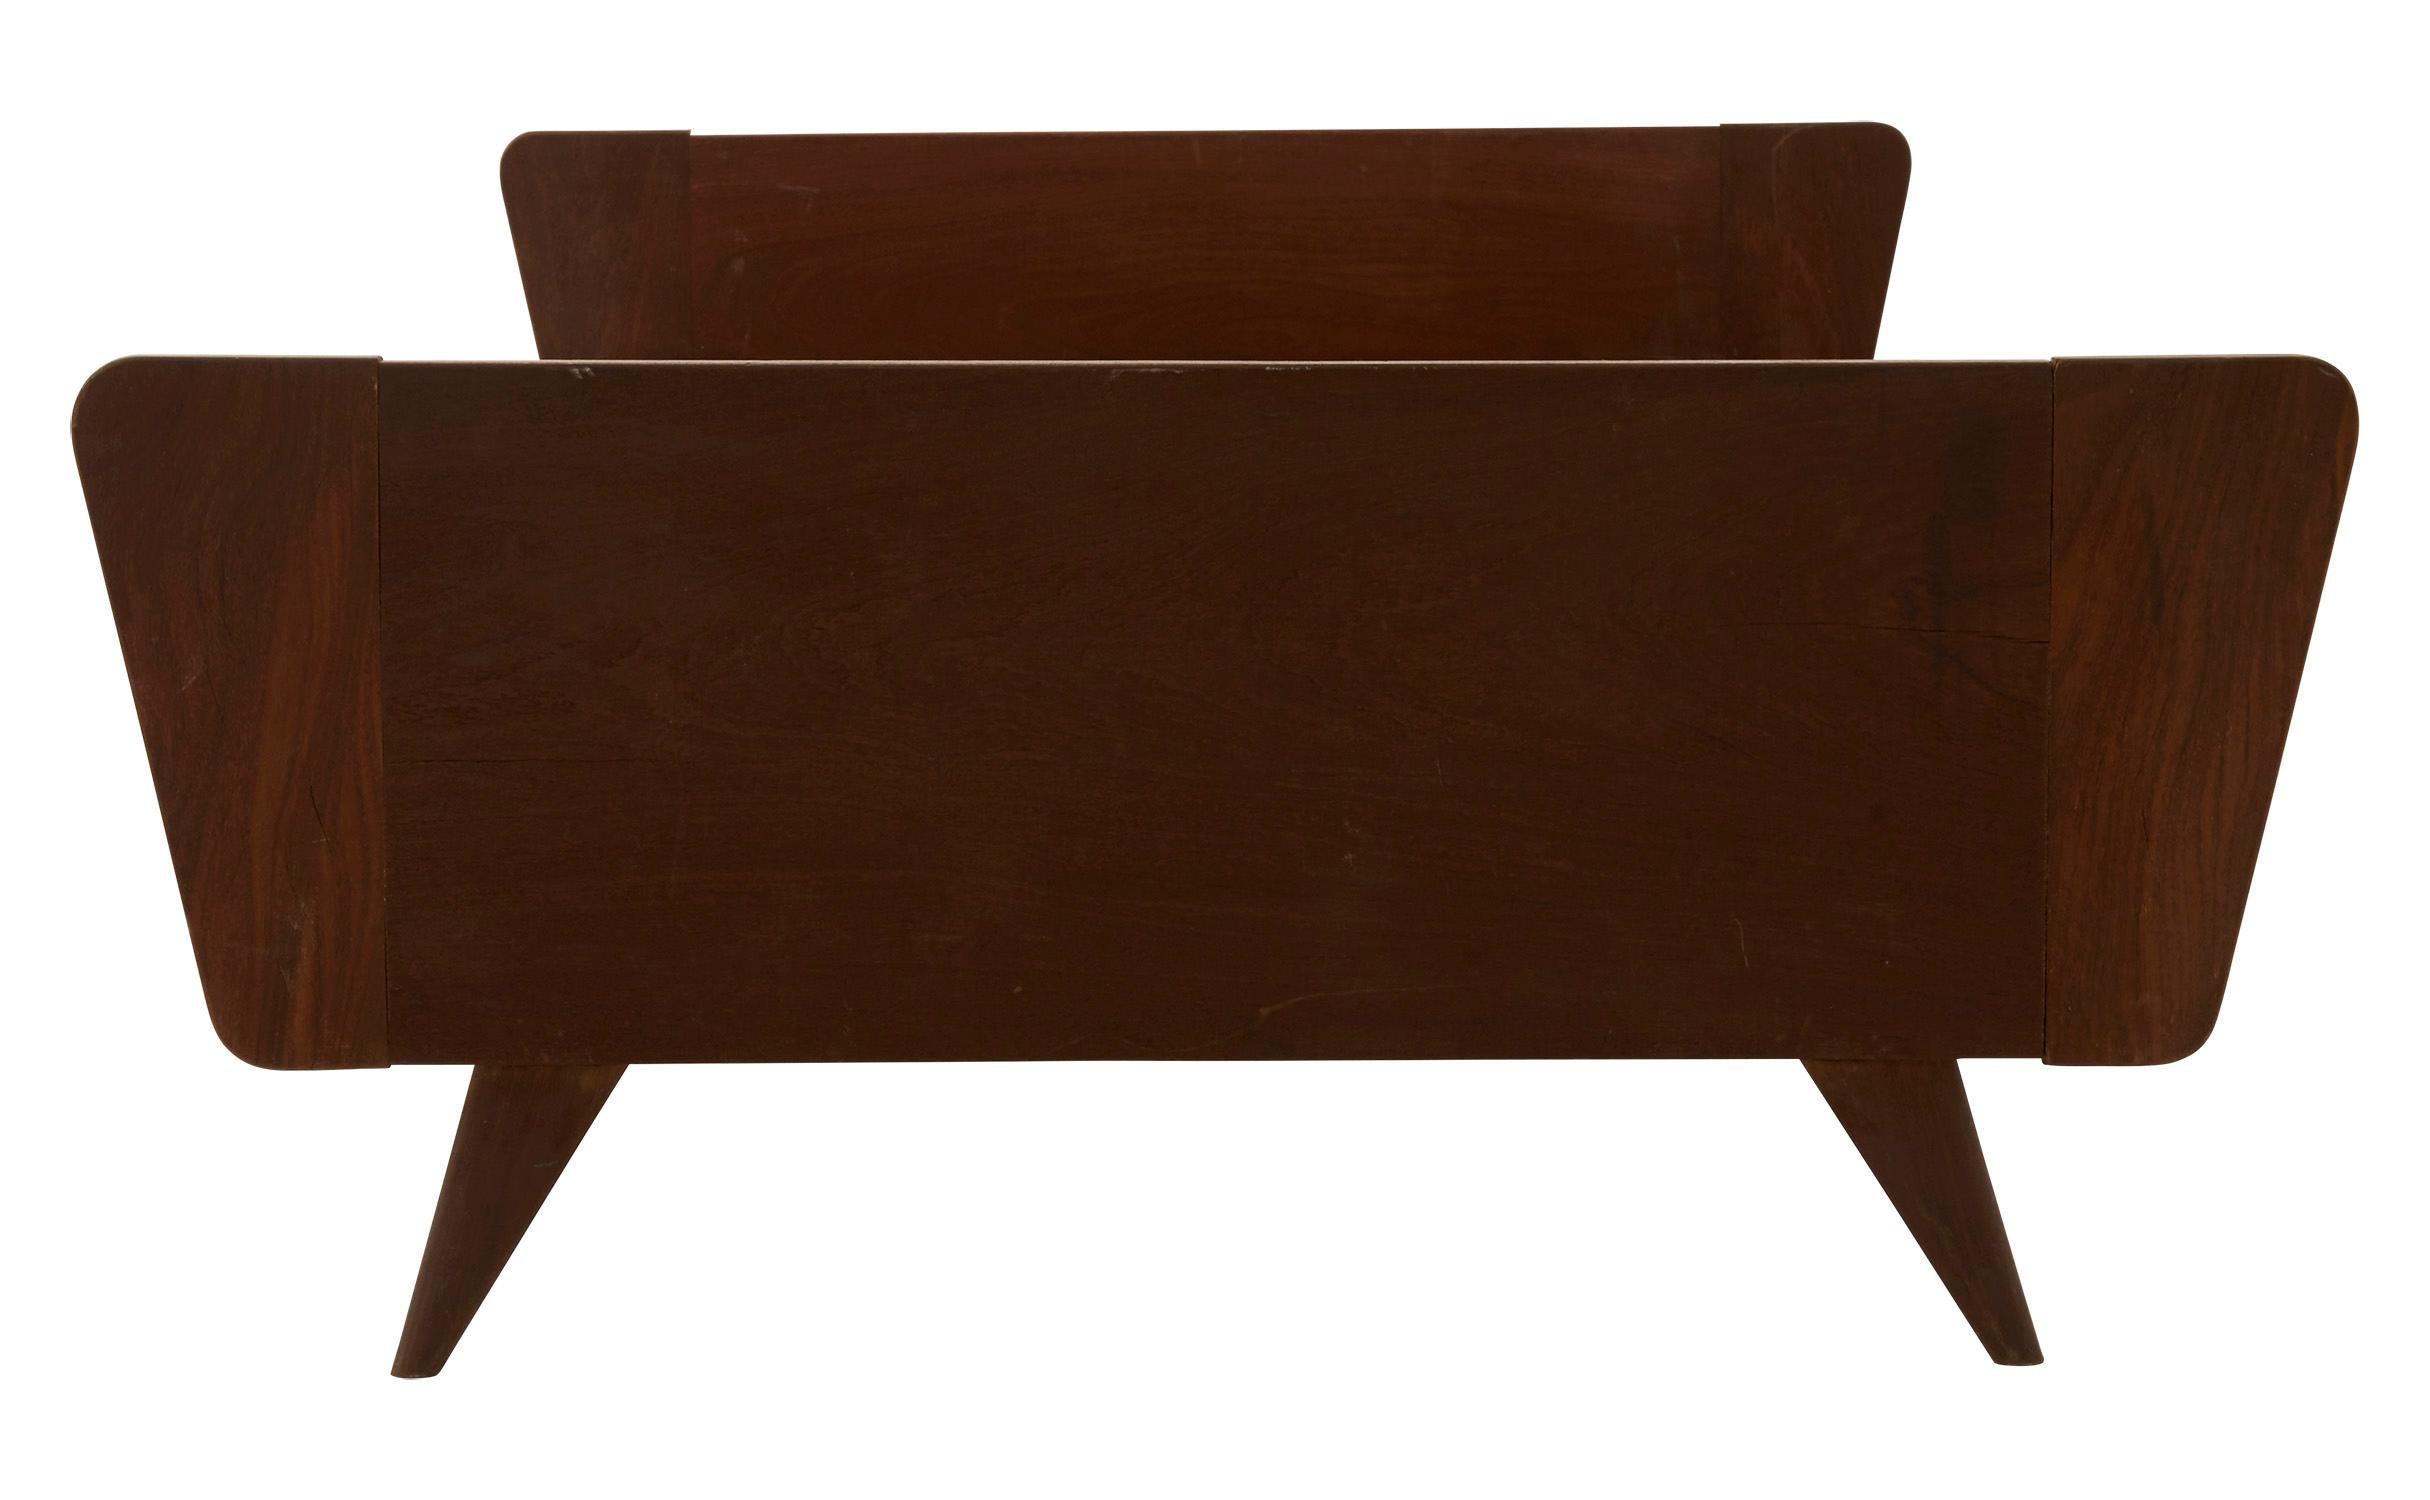 Spanish Mid-Century Modern Cane Seat Daybed